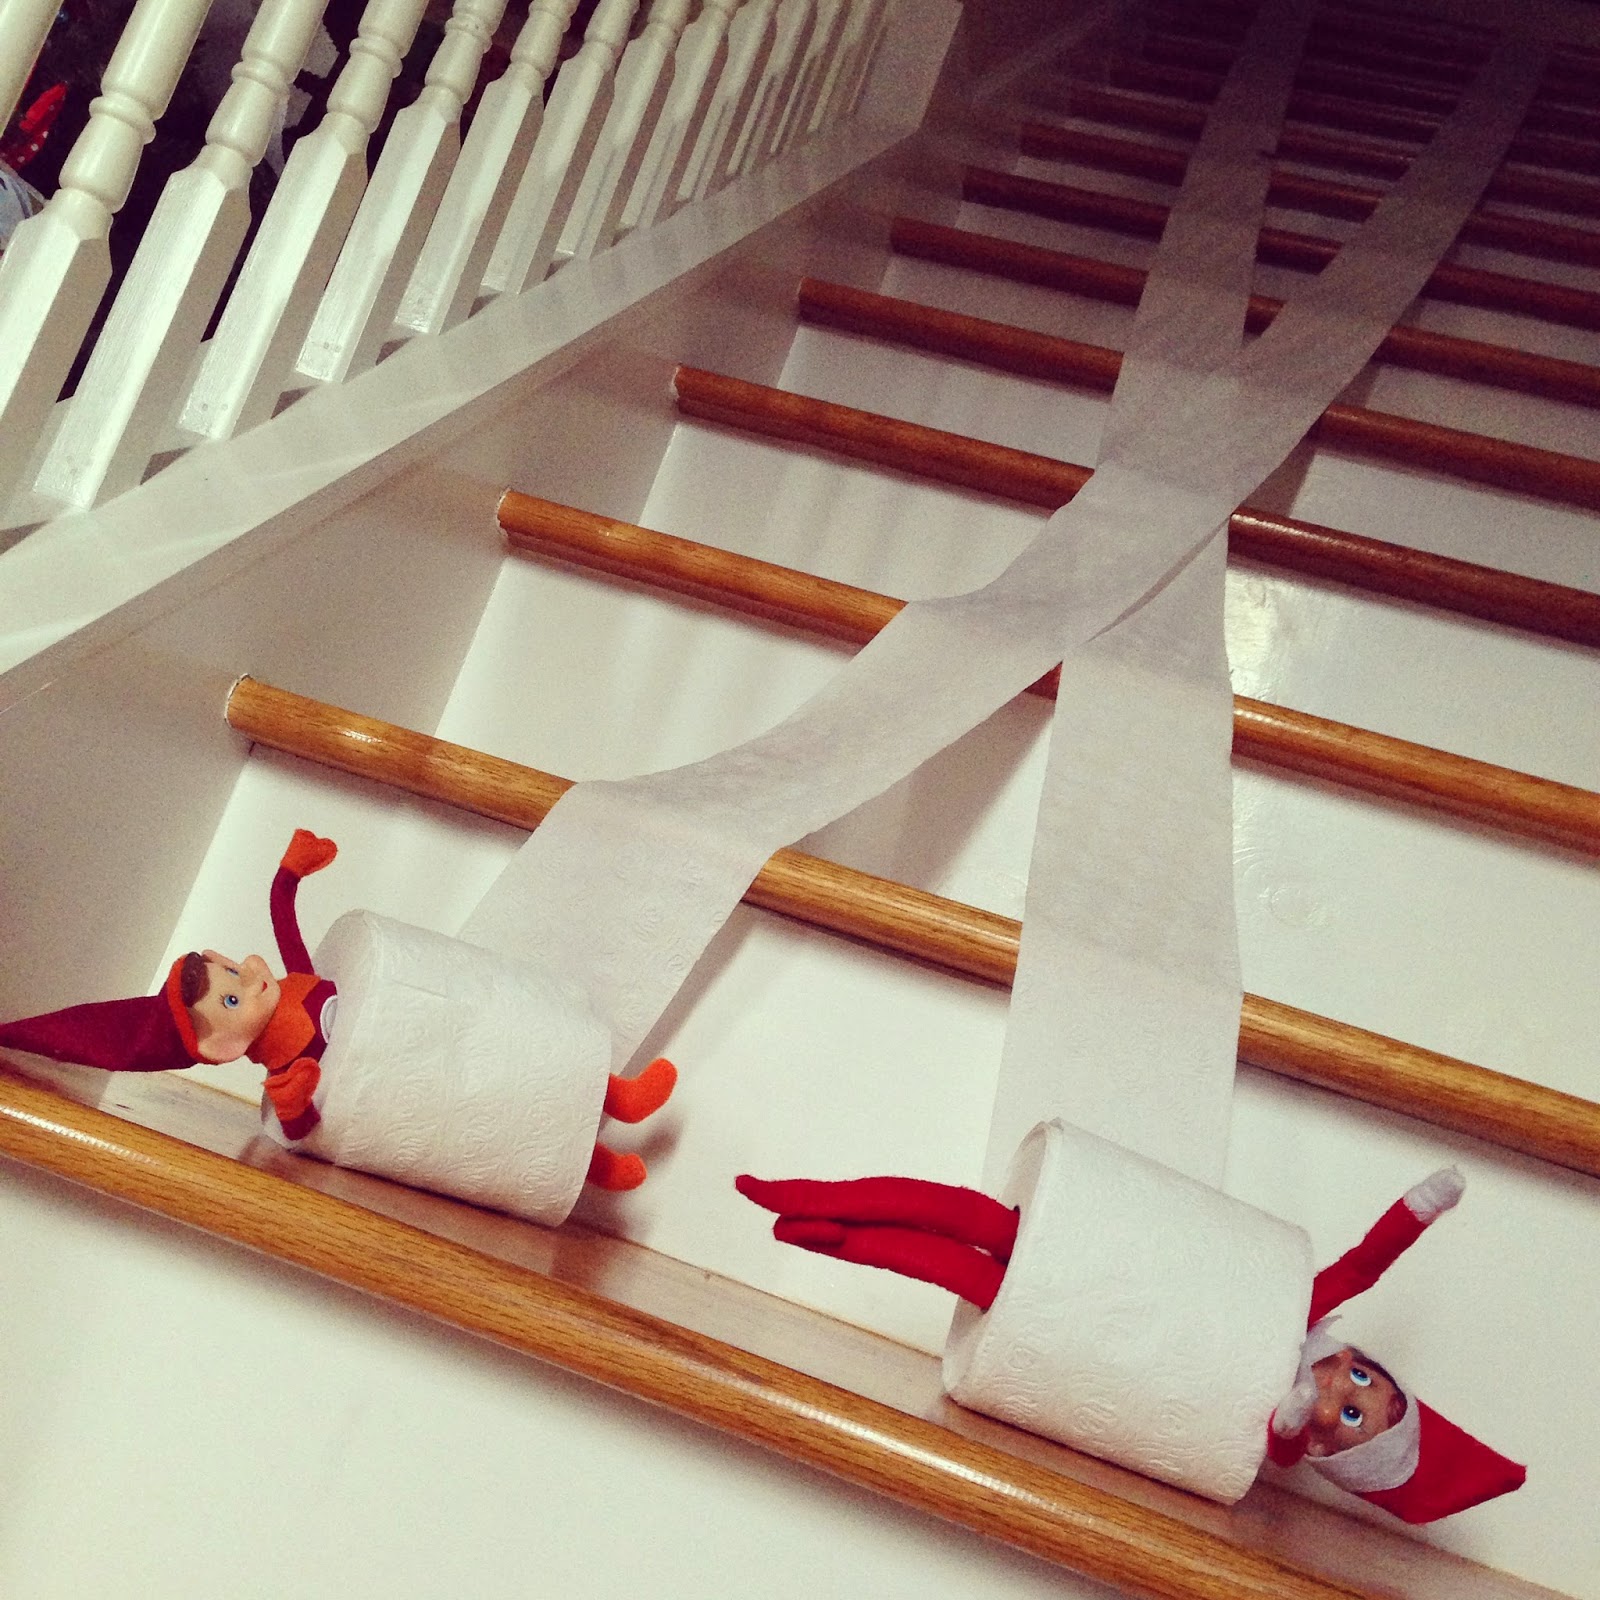 30 fun and unique Elf on the Shelf Ideas - Elf On the Shelf Toilet Paper race downstairs